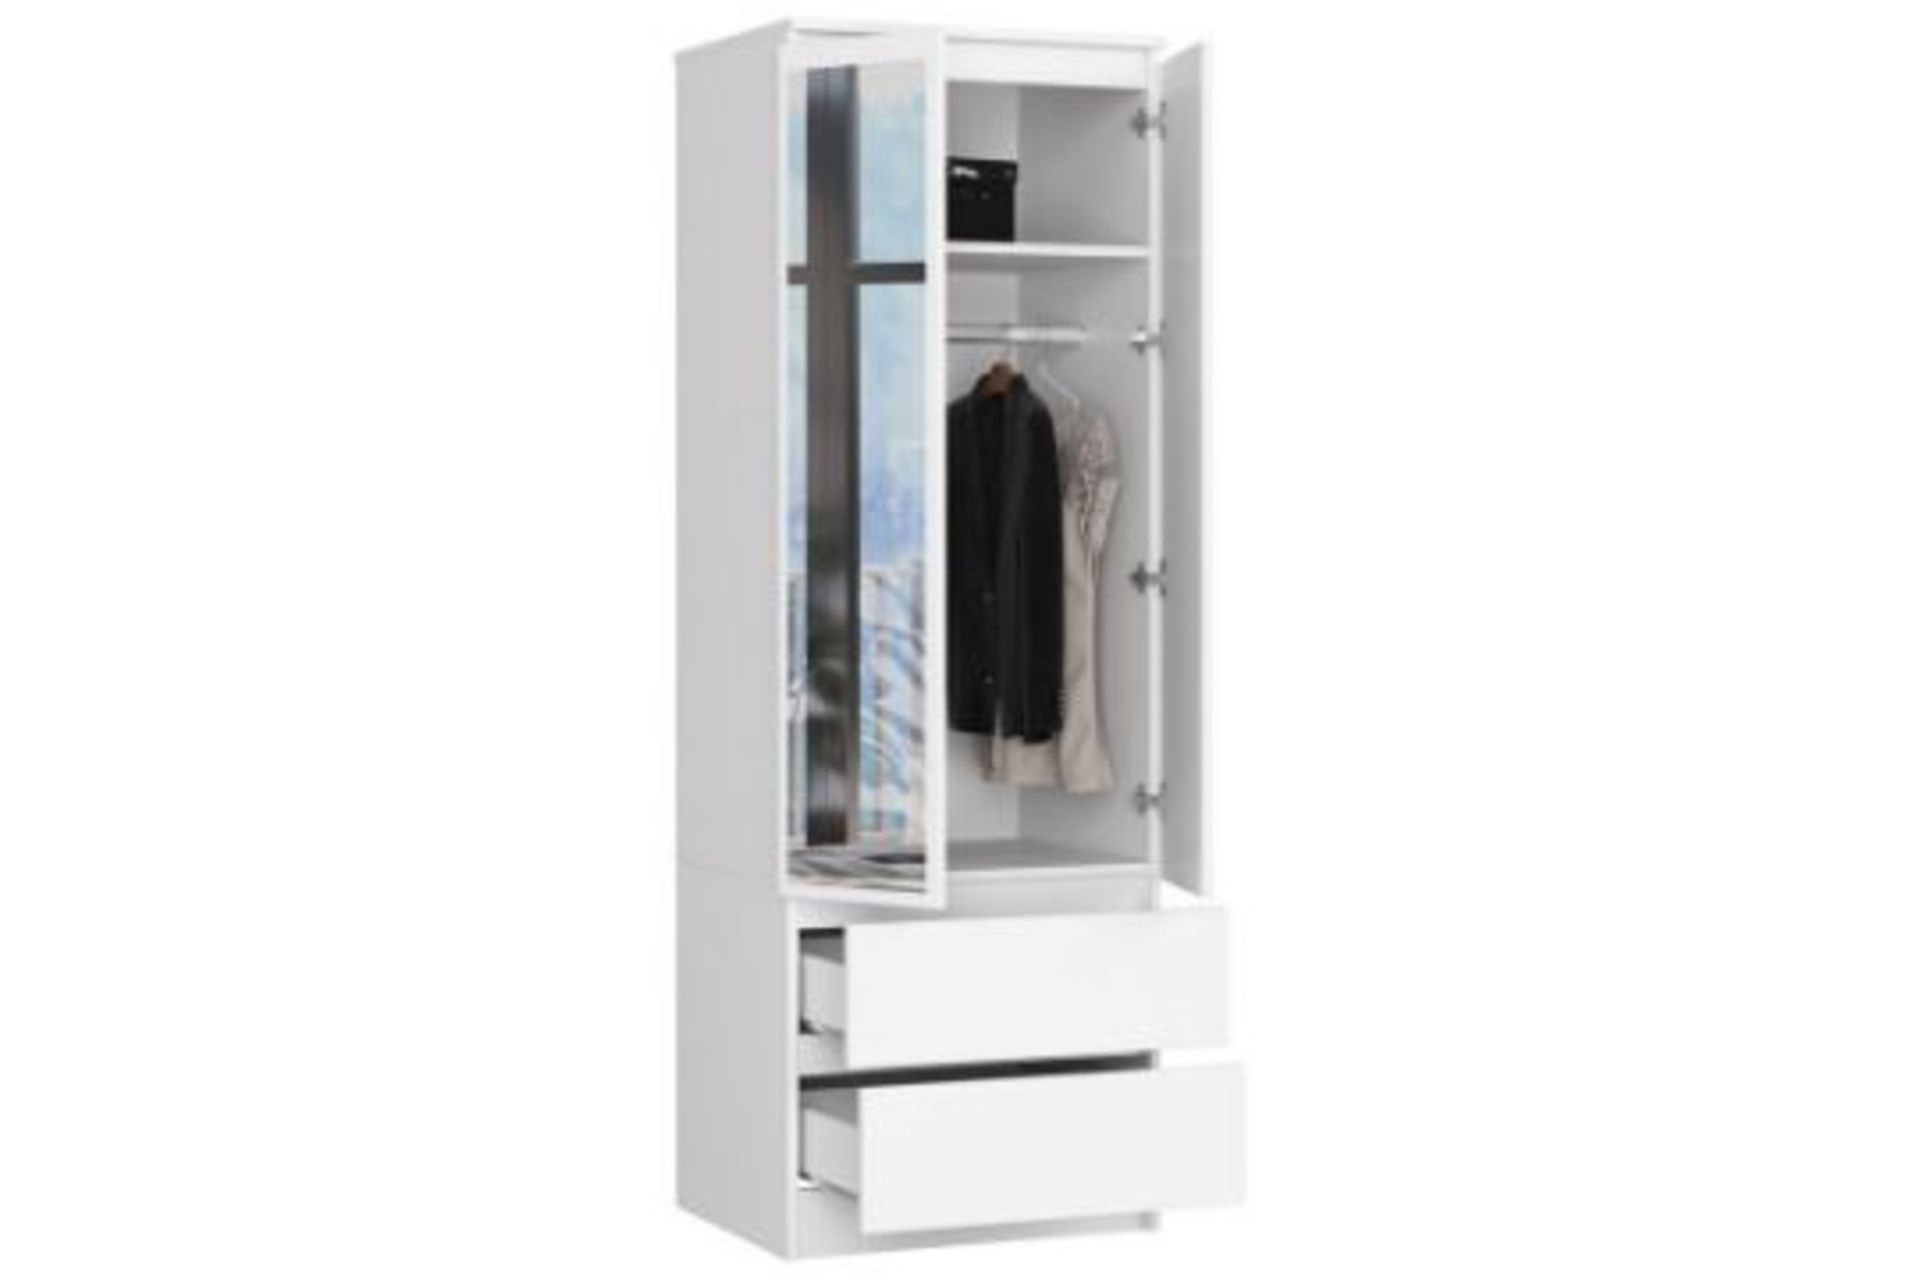 Alexsey 2 Door Wardrobe - RRP £599.99 COLLECTION ONLY - Image 2 of 2